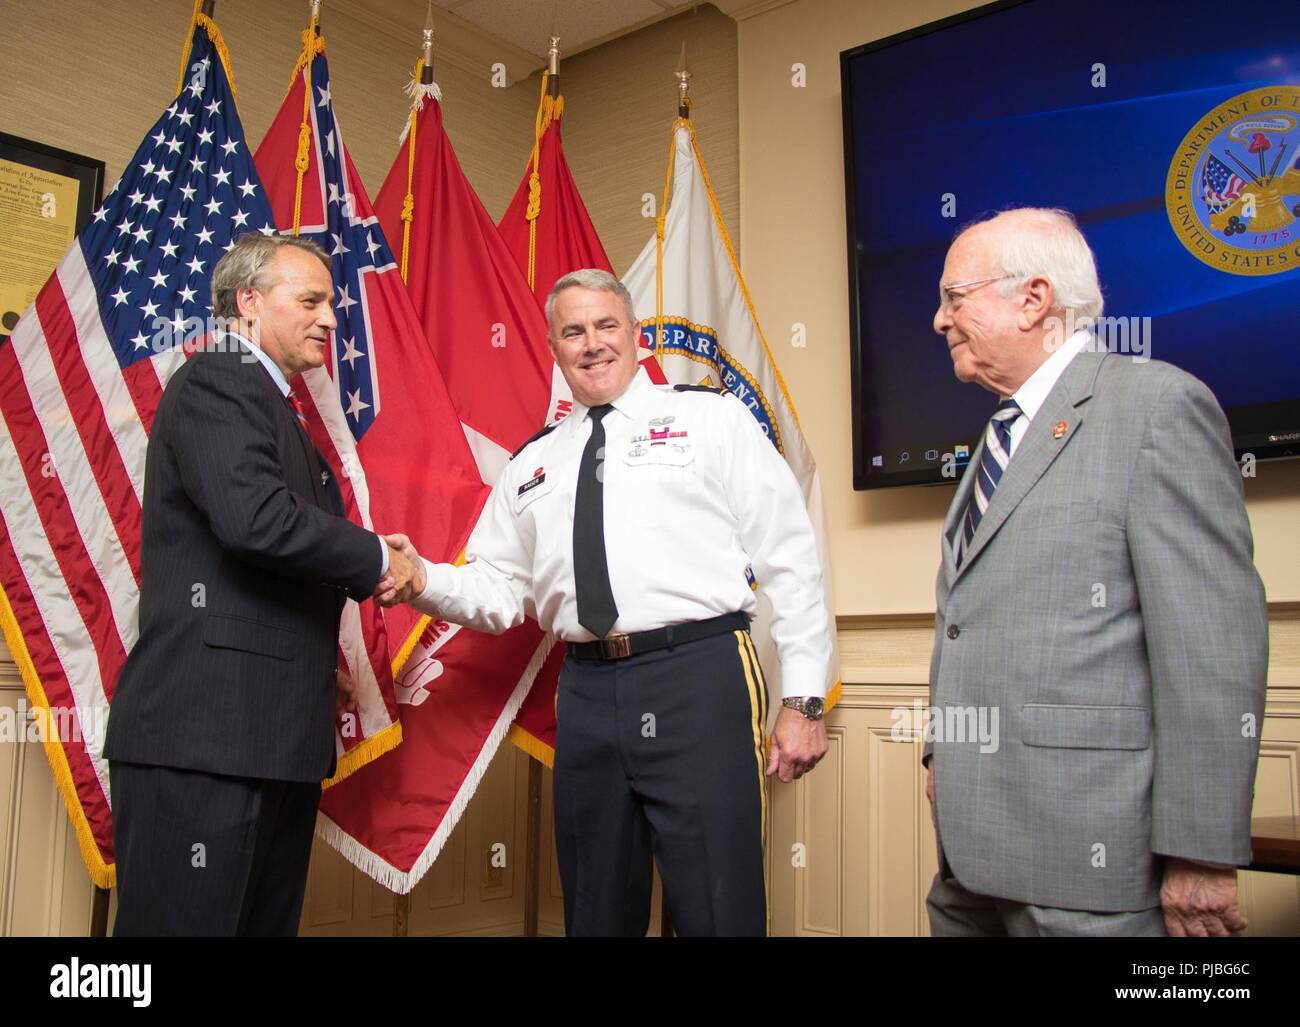 Mississippi River Commission President Maj. Gen. Richard Kaiser and Sam Angel, the MRC's longest standing member, congratulate James A. Reeder after his swearing in at the MRC headquarters in Vicksburg, Miss., July 11, 2018. President Donald Trump appointed Reeder as a member of the Mississippi River Commission May 17, 2018. Commission appointments are nominated by the President of the United States and vetted by the U.S. Senate. (USACE Stock Photo